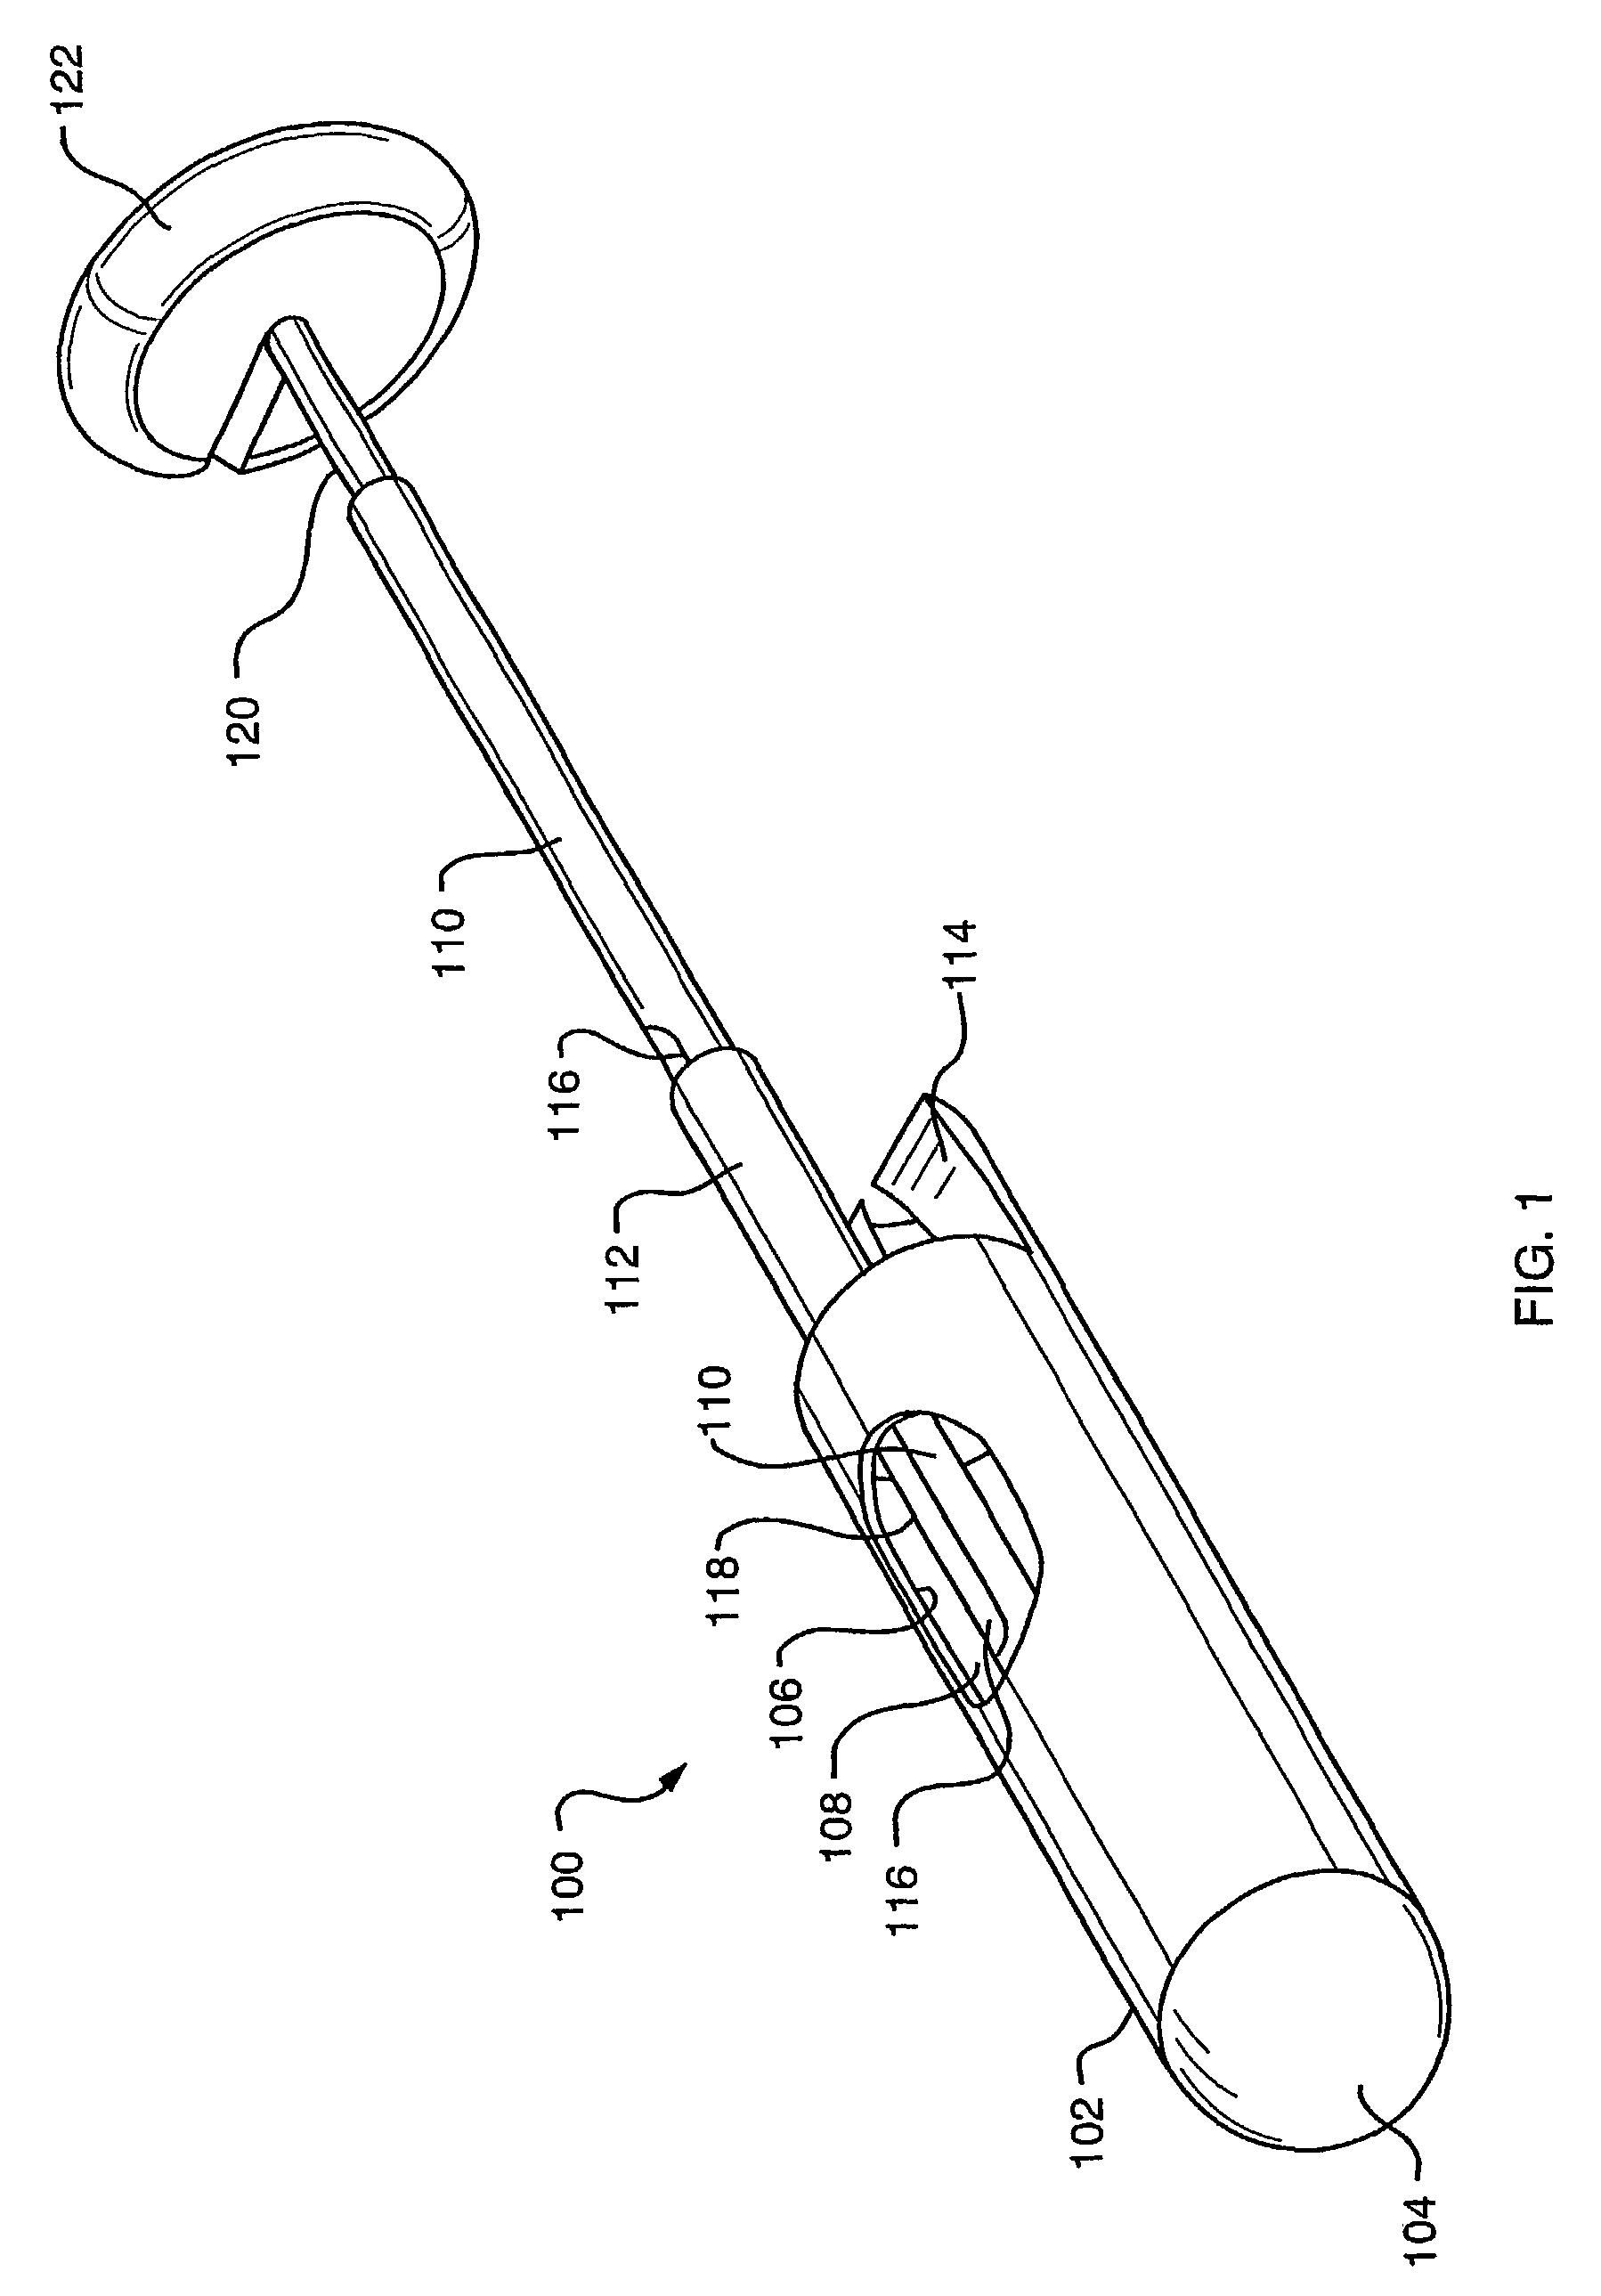 Tissue capturing and suturing device and method